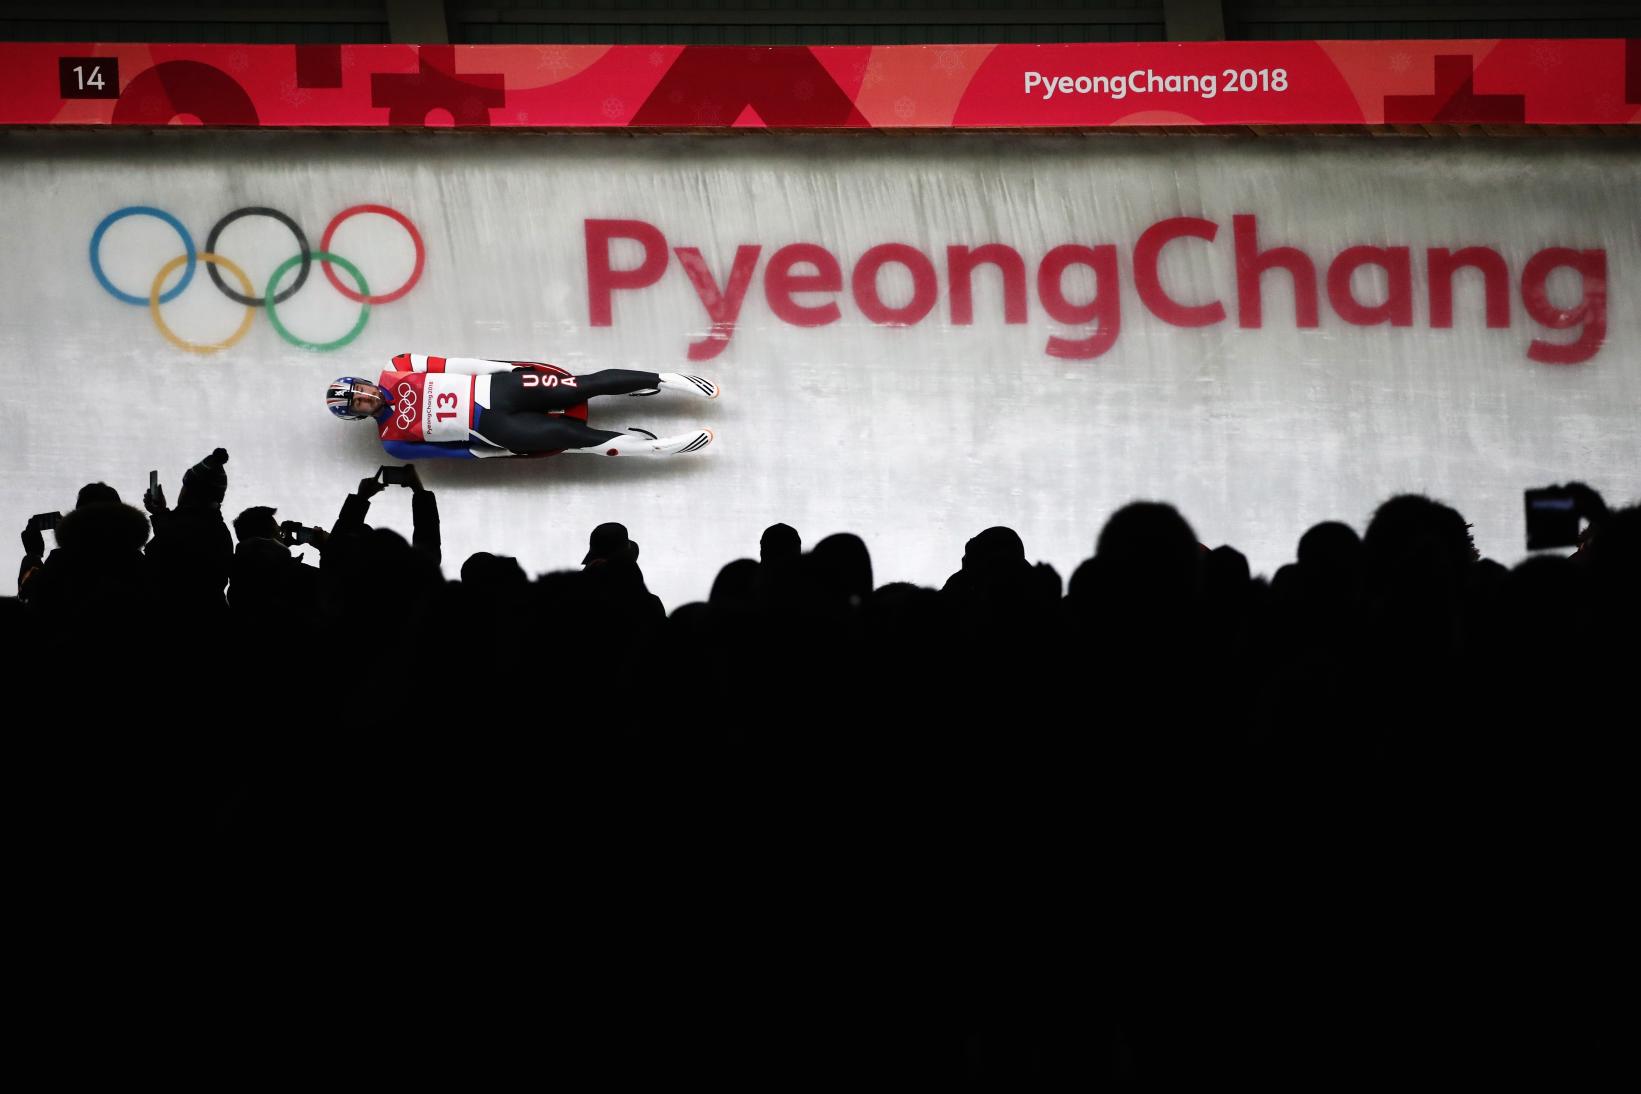 Chris Mazdzer on the Pyeongchange Luge track en route to a silver medal